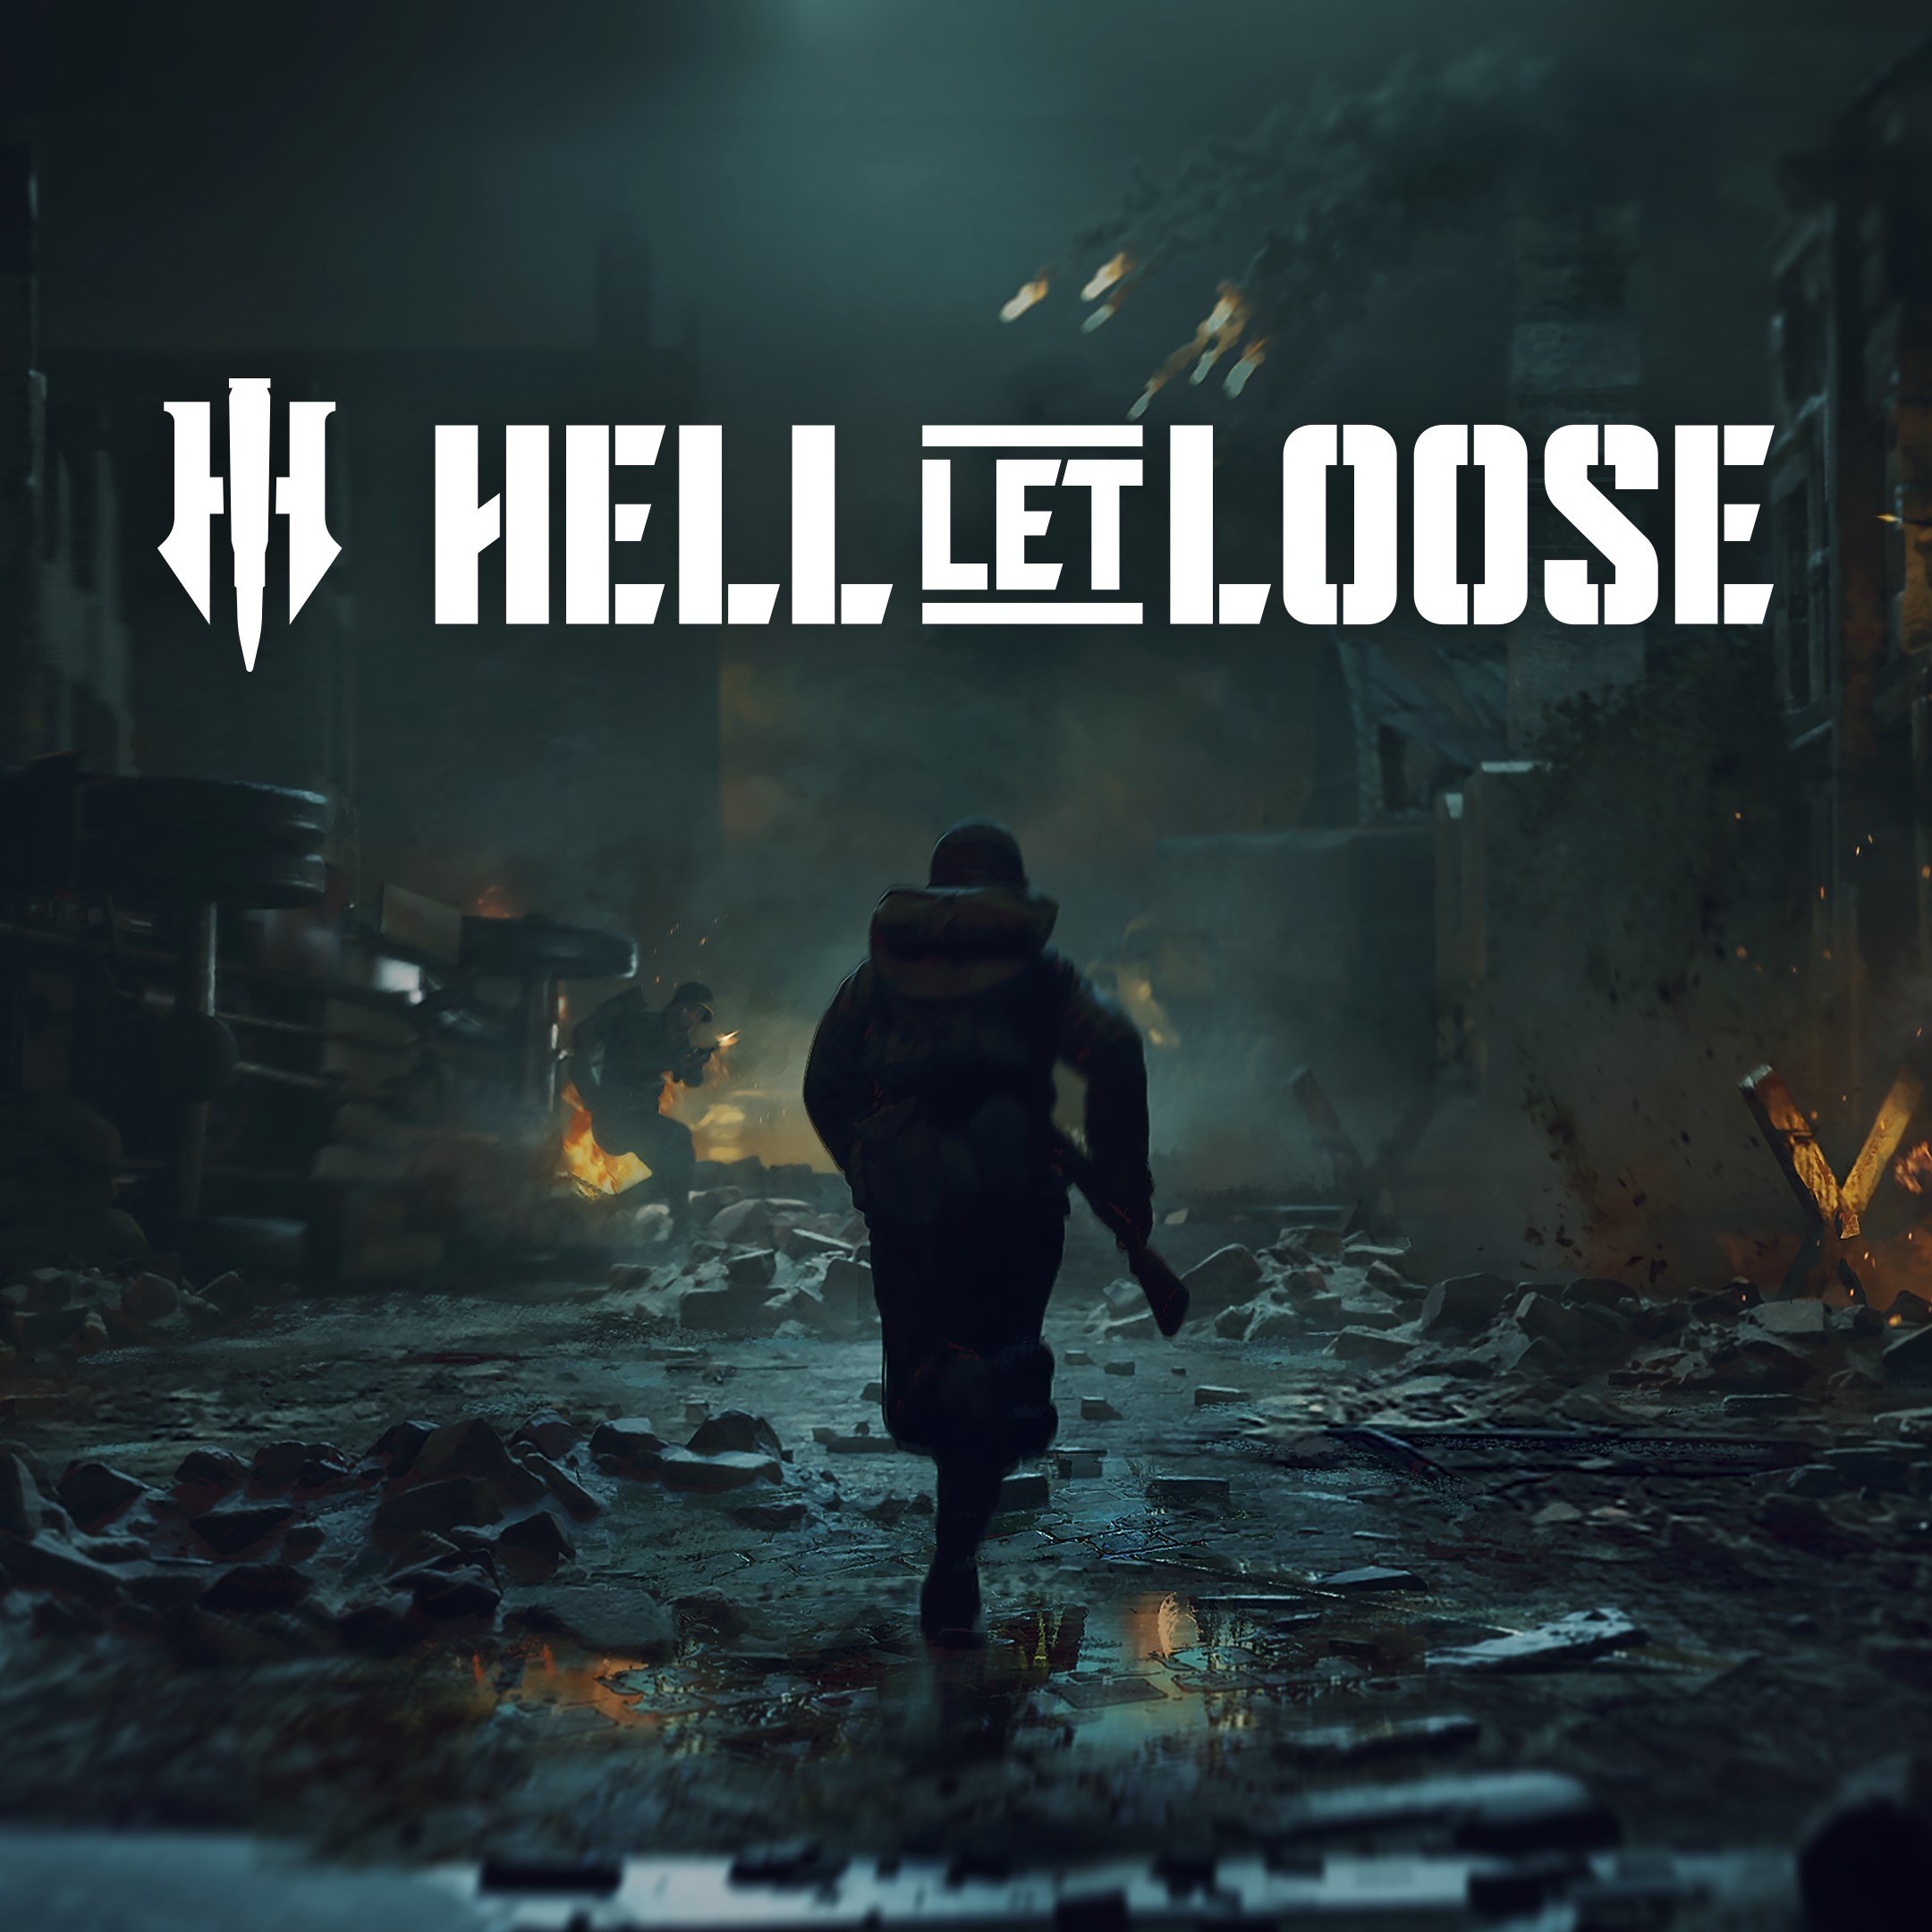 Boxart for Hell Let Loose